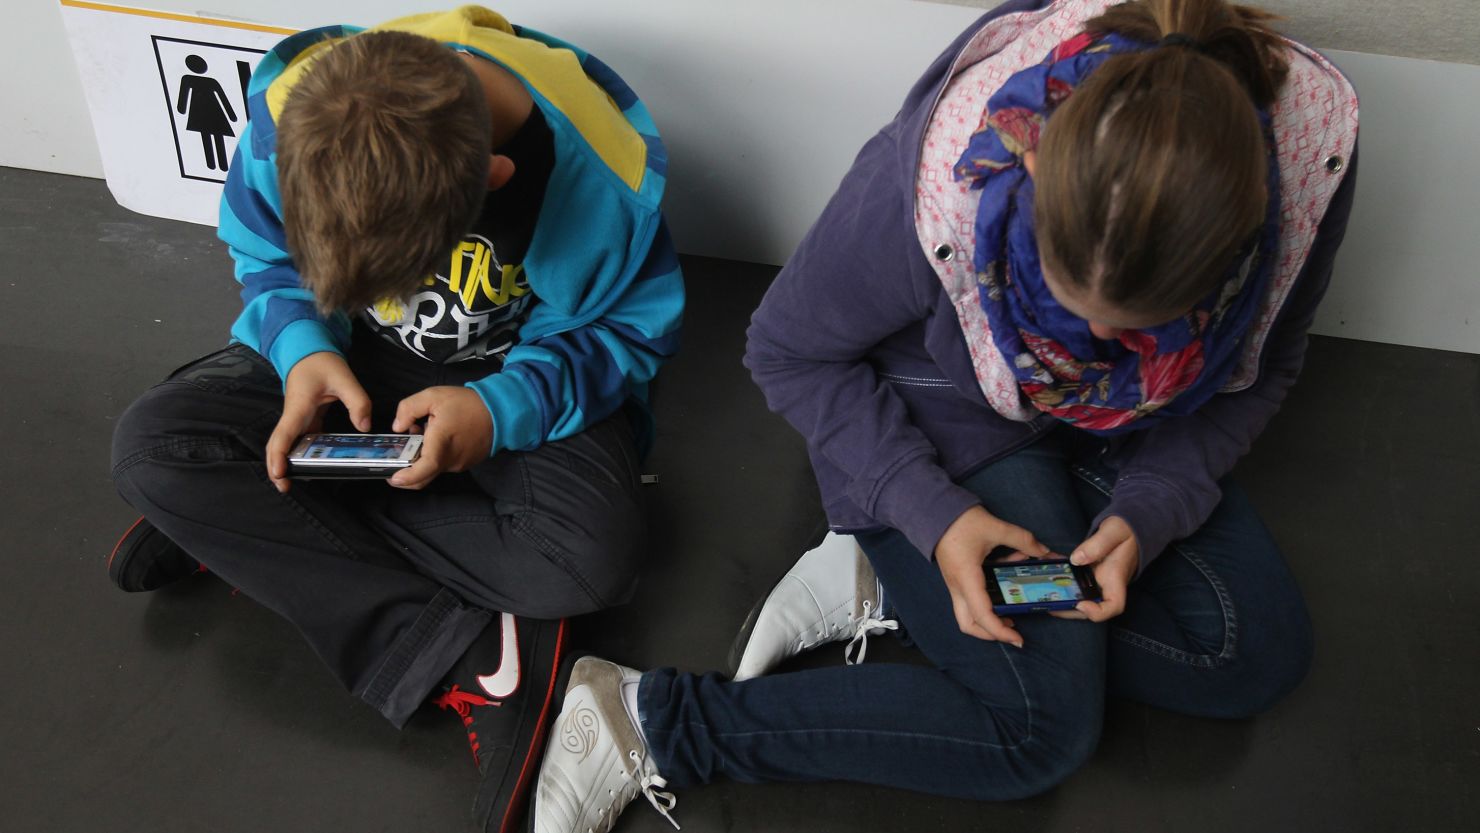 Children play video games on their smartphones. 